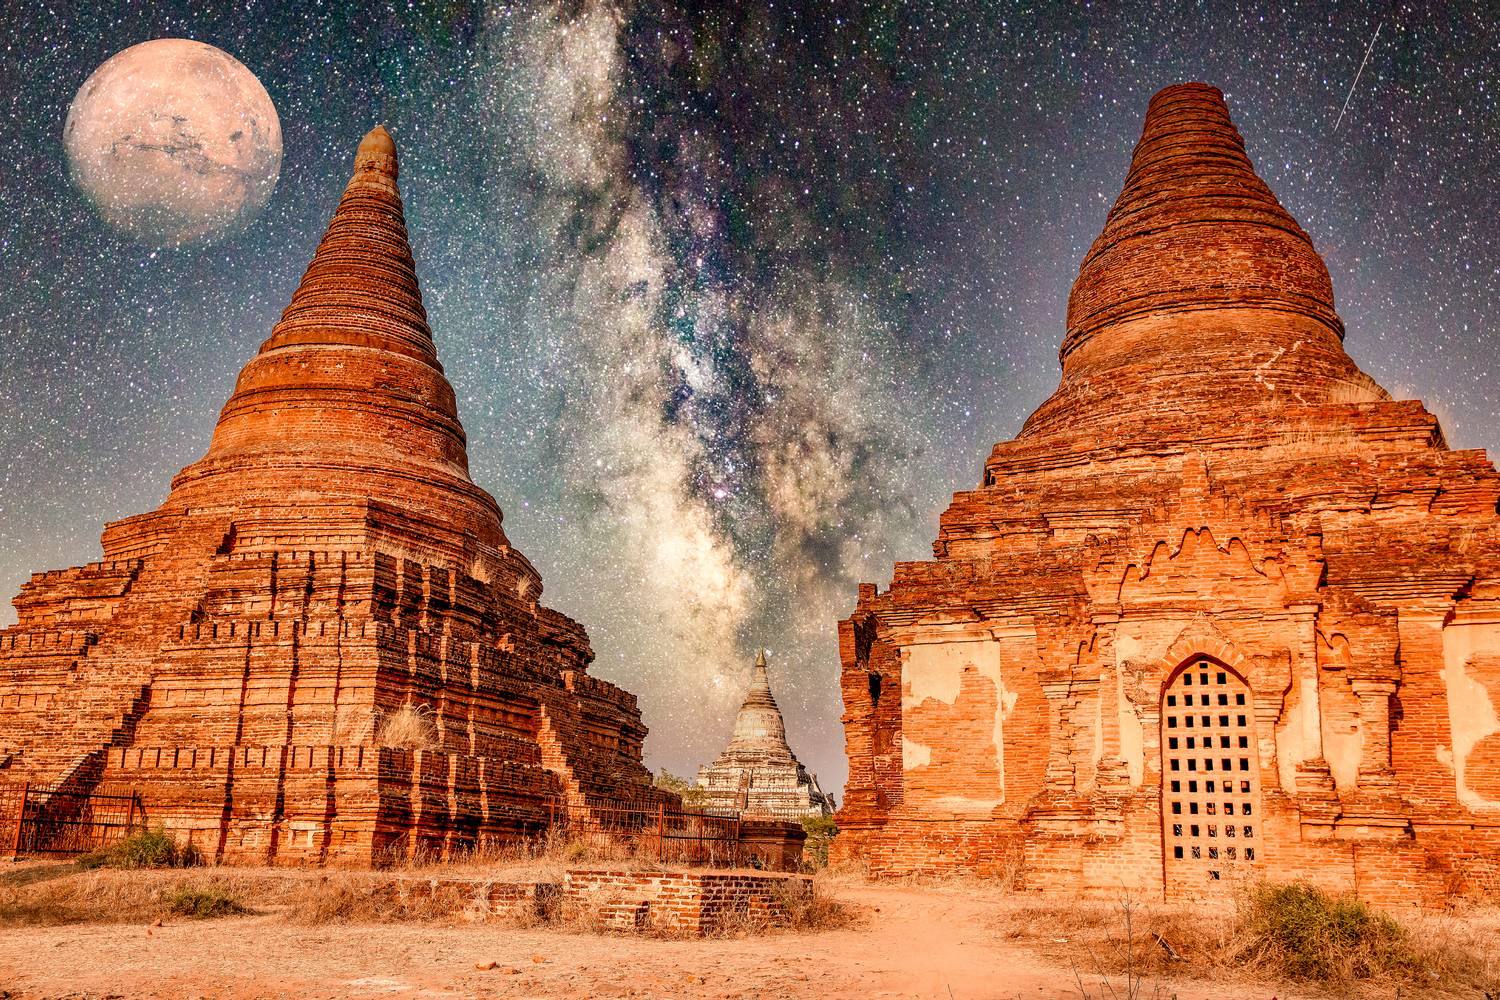 Myanmar in Space, Tempel, Himmel und Mond  a Miro May